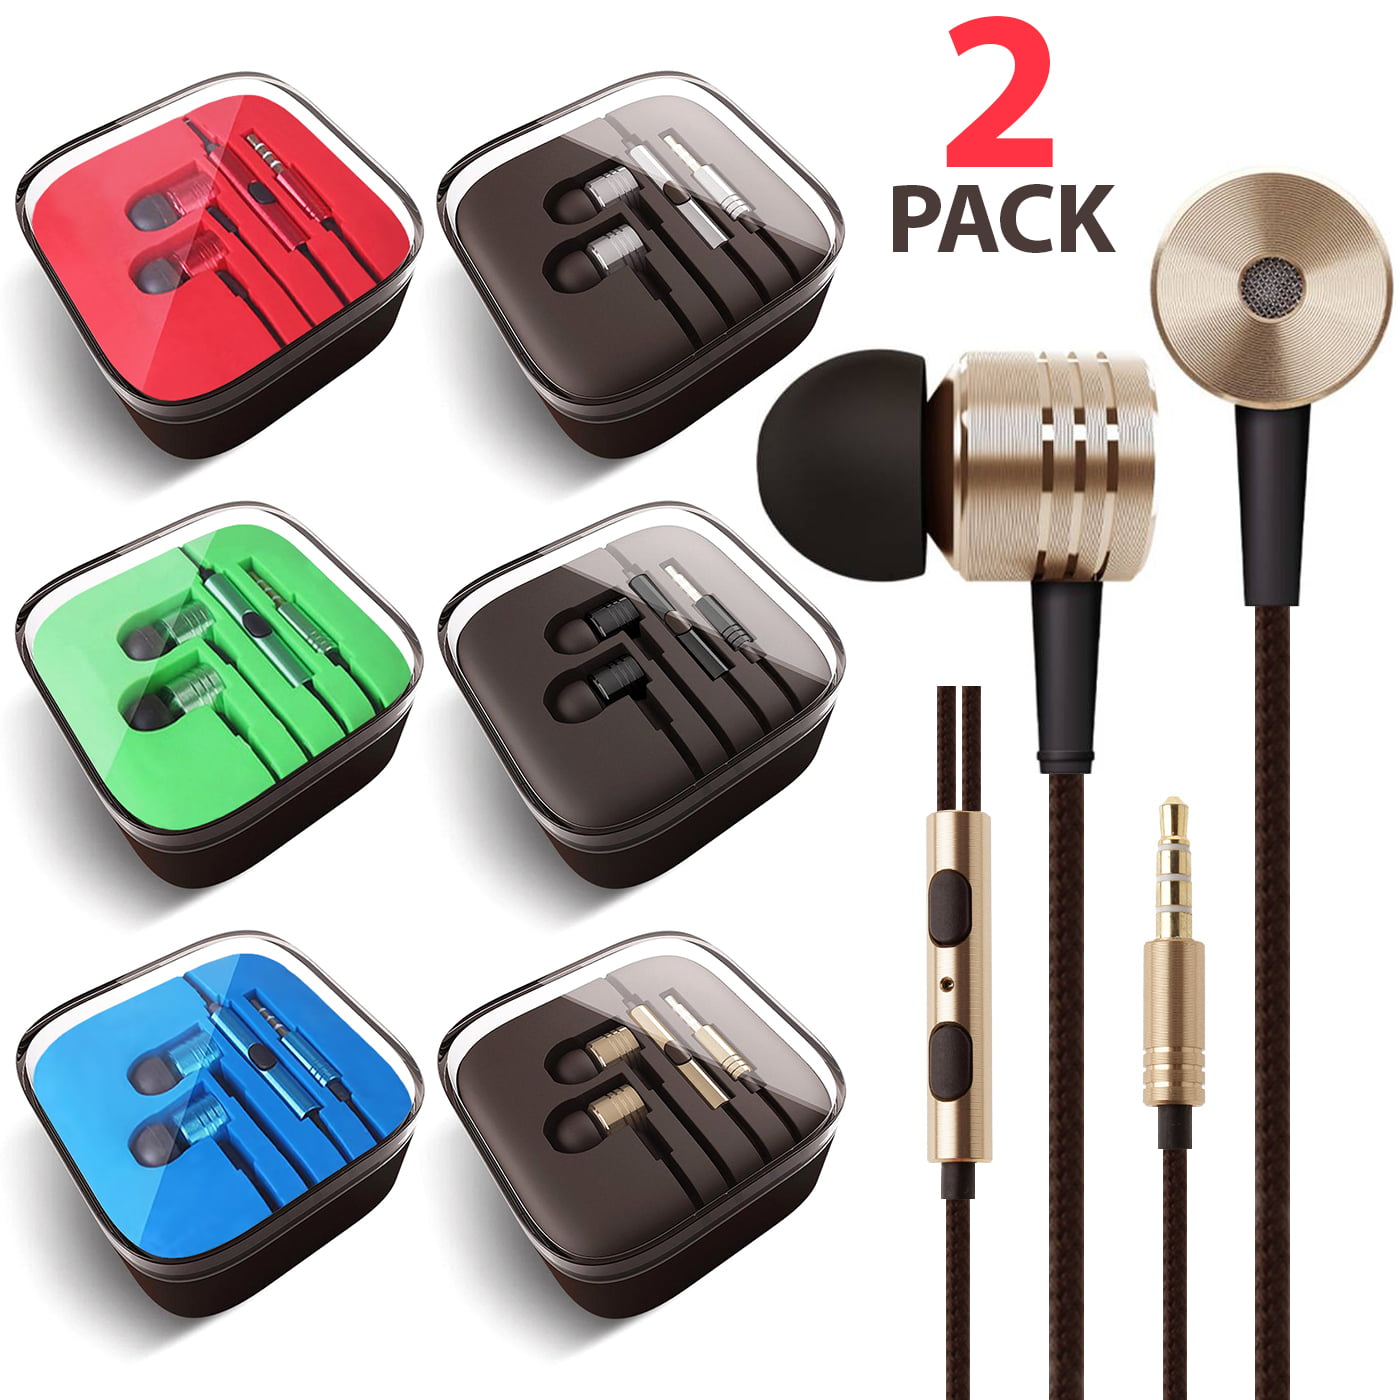 2x Pack 3.5mm Headphones In-Ear Earbuds Afflux Universal Stereo Headset Earphones For Cellphone Tablet iPhone 6 6S 5S SE 6/6S Plus Earbuds iPod iPad Samsung Galaxy S9 S8 S7 S6 Note 5 Note 8 9 LG Stylo